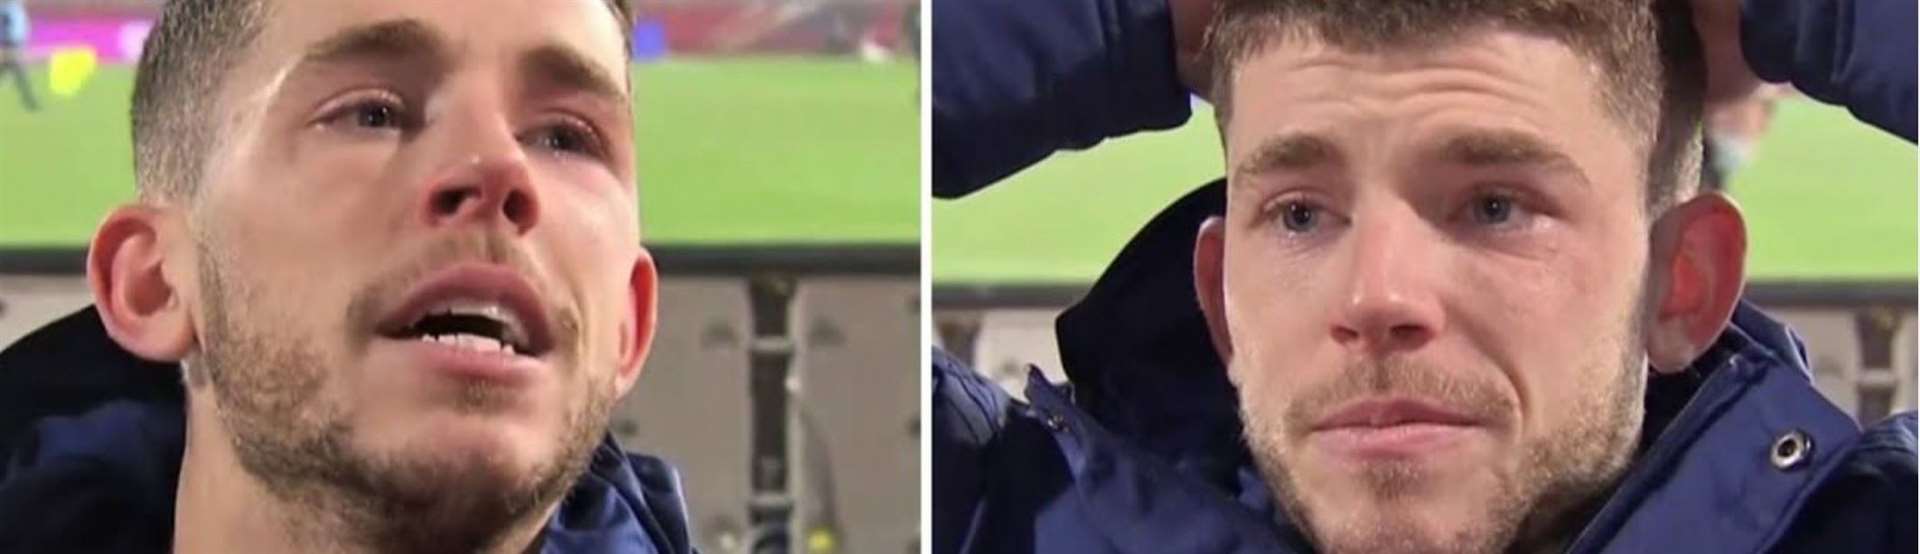 Inverness lad and Scotland hero Ryan Christie in his tearful post-match interview with Sky TV